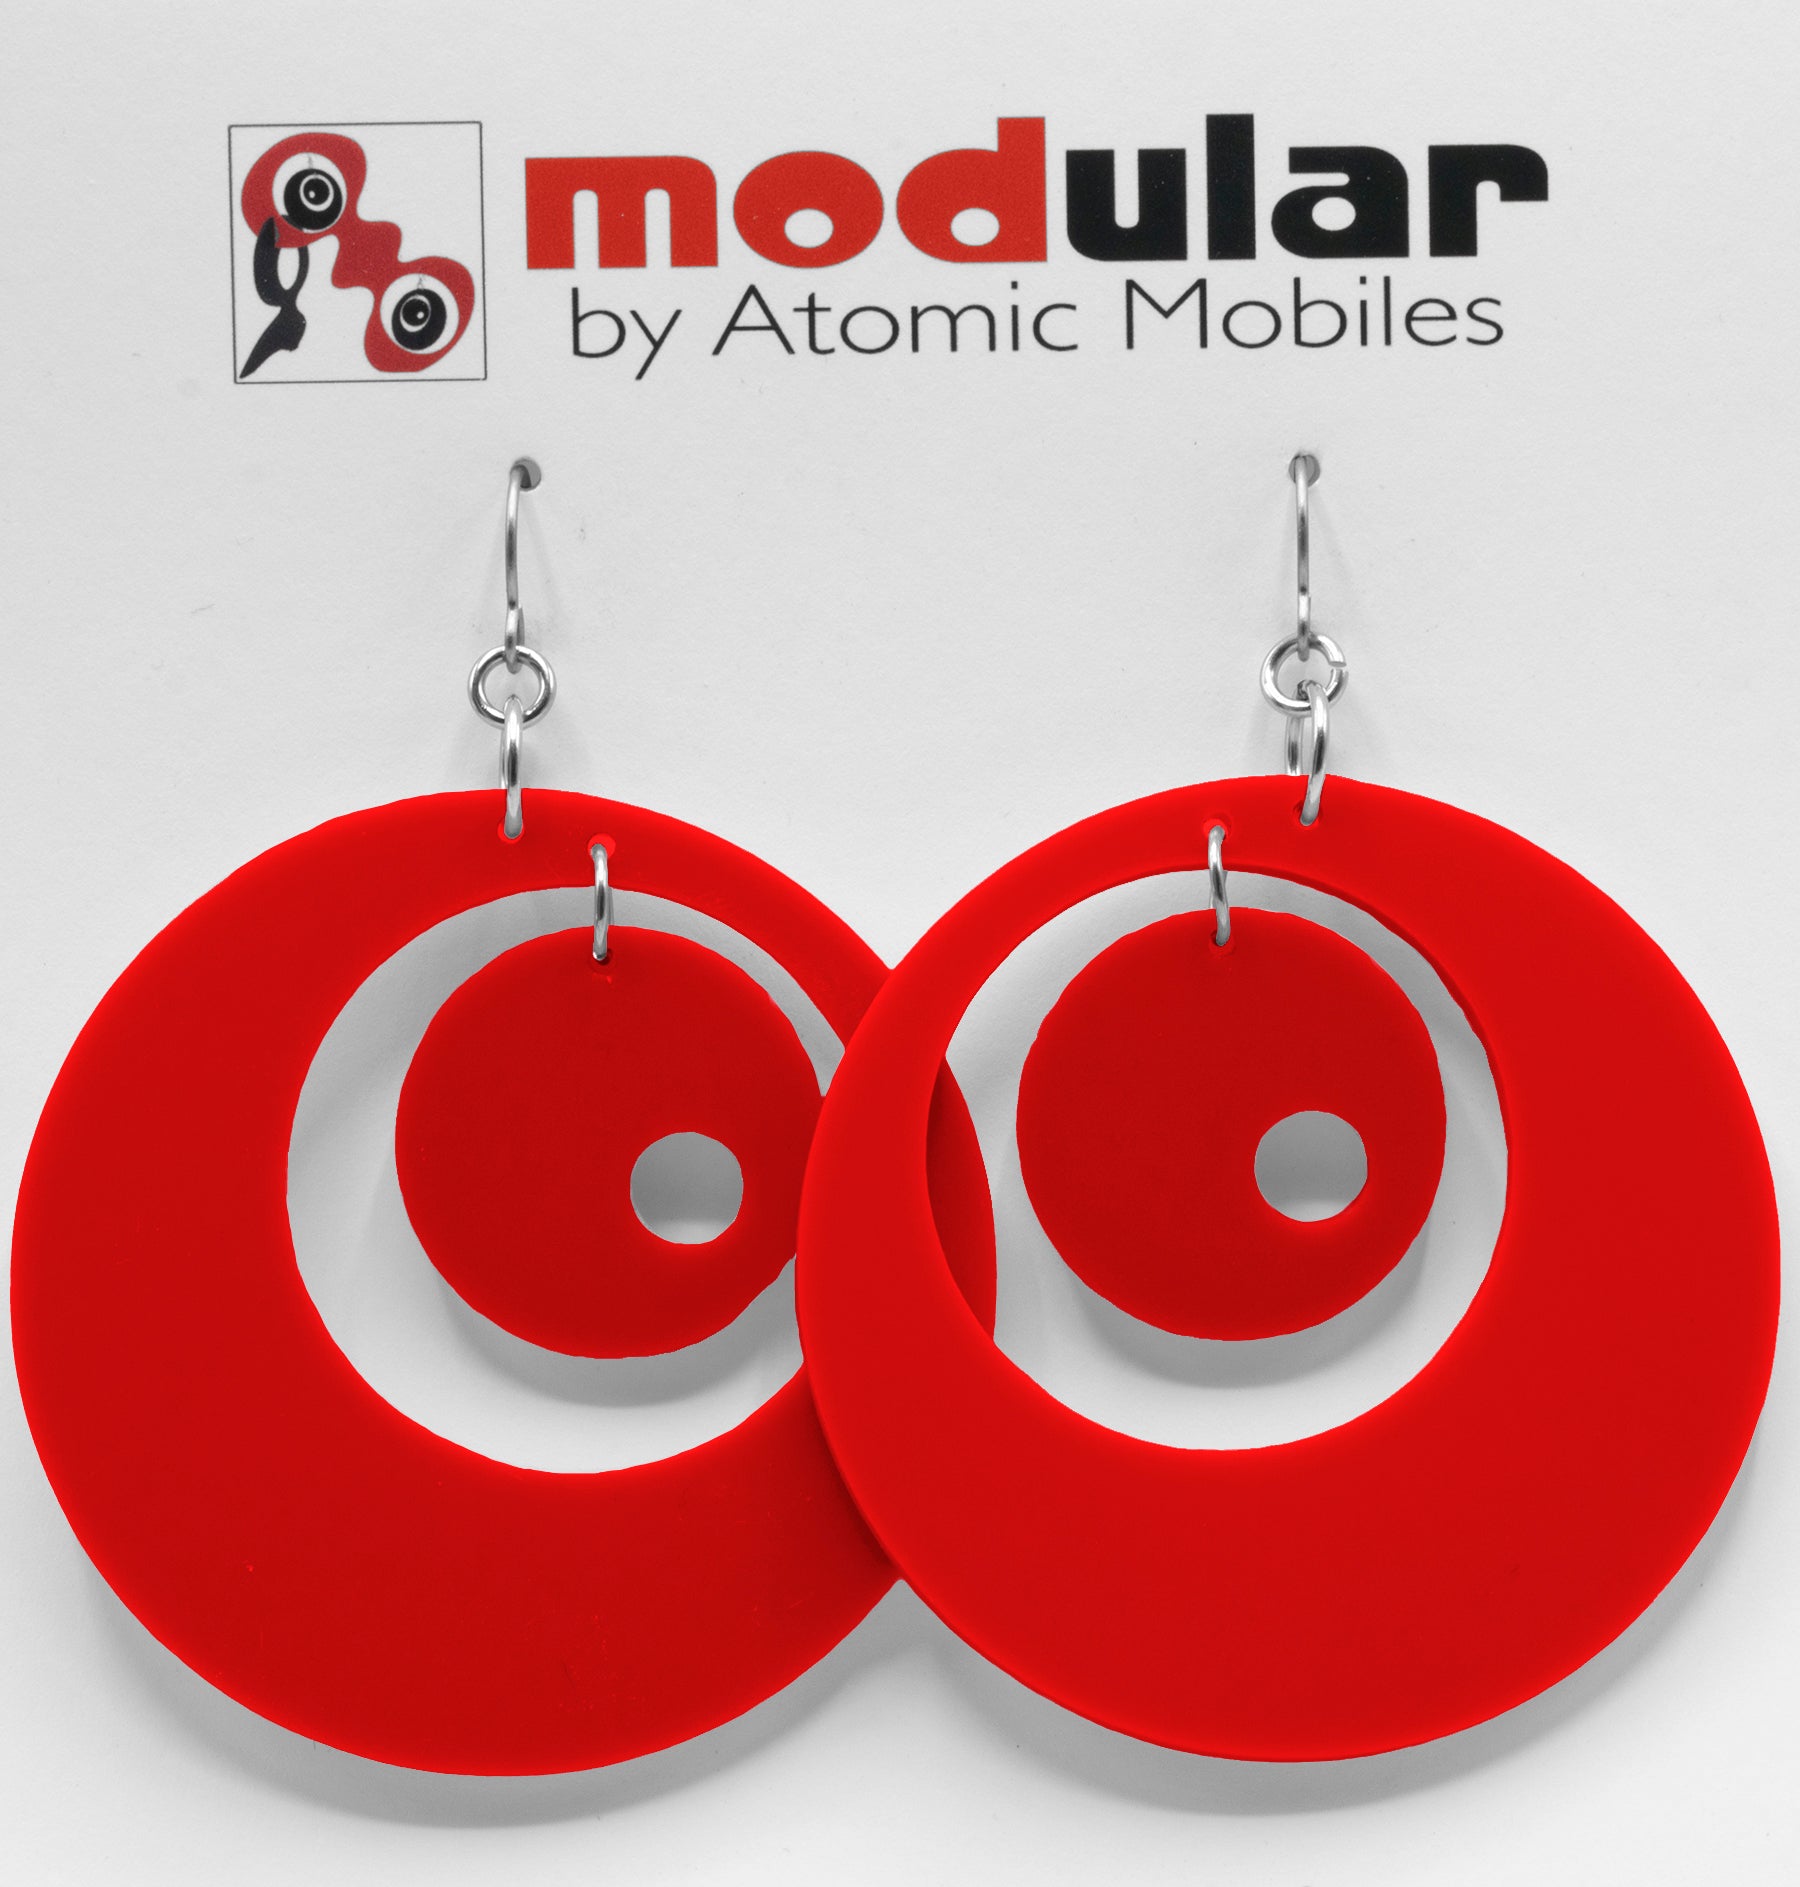 Groovy Statement Earrings in Red - space age midcentury retro inspired dangle earrings - handmade jewelry by AtomicMobiles.com